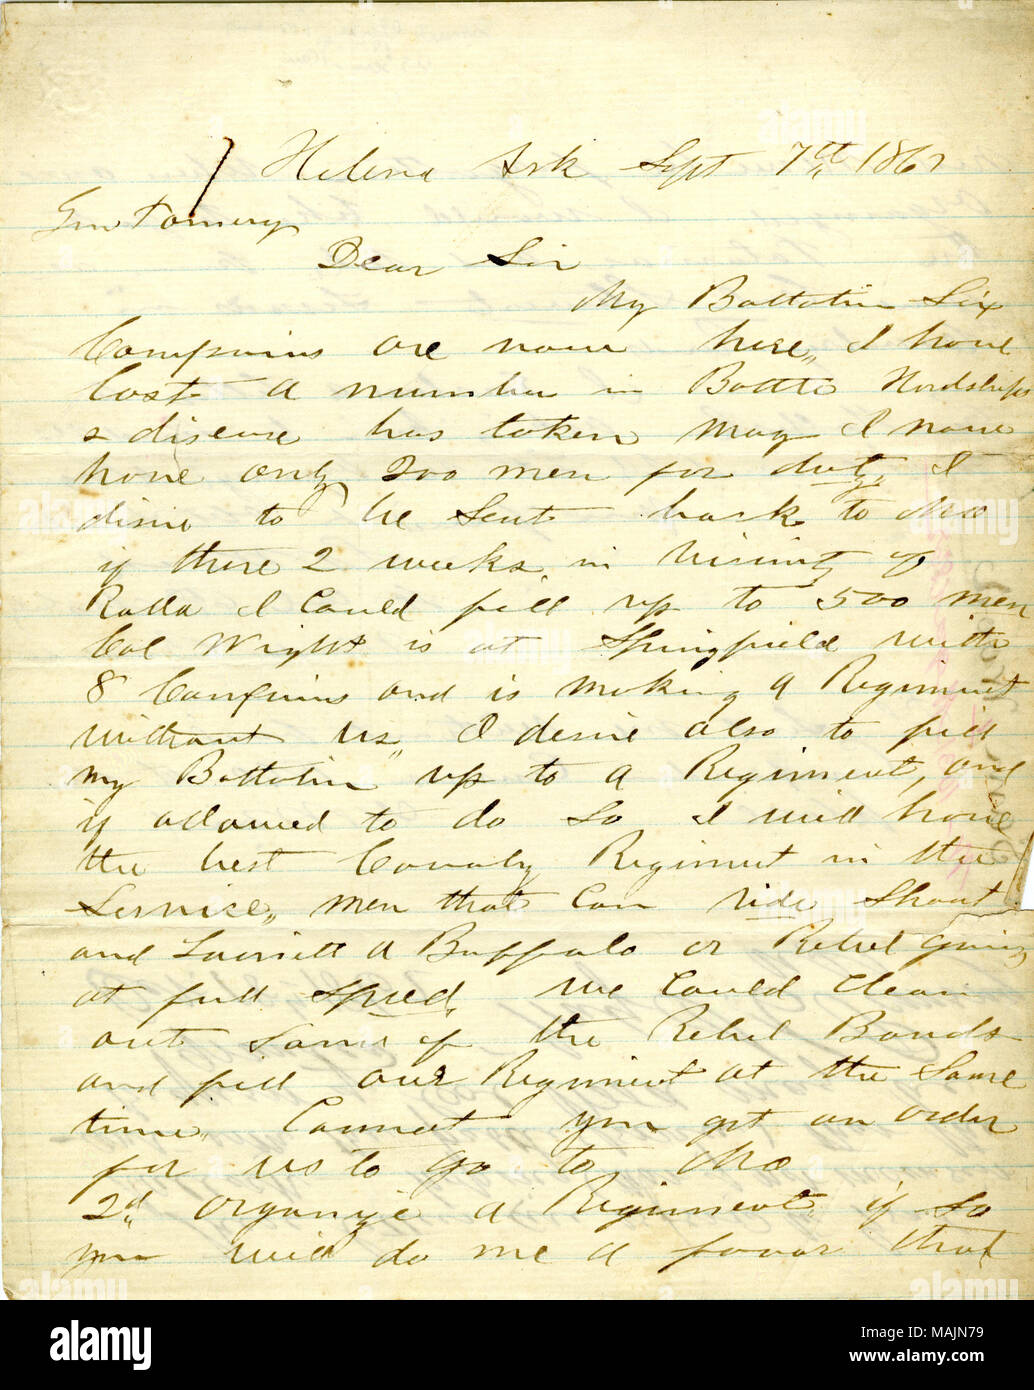 Requests permission to bring a battalion to Missouri to raise a regiment.  Transcription: Helena Ark Sept 7th 1862 Gen Pomeroy Dear Sir My Battalions Six Companies are name here. I have lost a number in Battle Hardships a disease has taken many I now have only 200 men for duty I desire to be Sent back to Mo if there 2 weeks in vicinity of Rolla I could fill up to 500 men Col Wright is at Springfield with 8 Companies and is making 9 Regiments without us I desire also to fill my Battalion up to a Regiment, and if allowed to do So I will have the best Cavalry Regiment in the Service, men that can Stock Photo